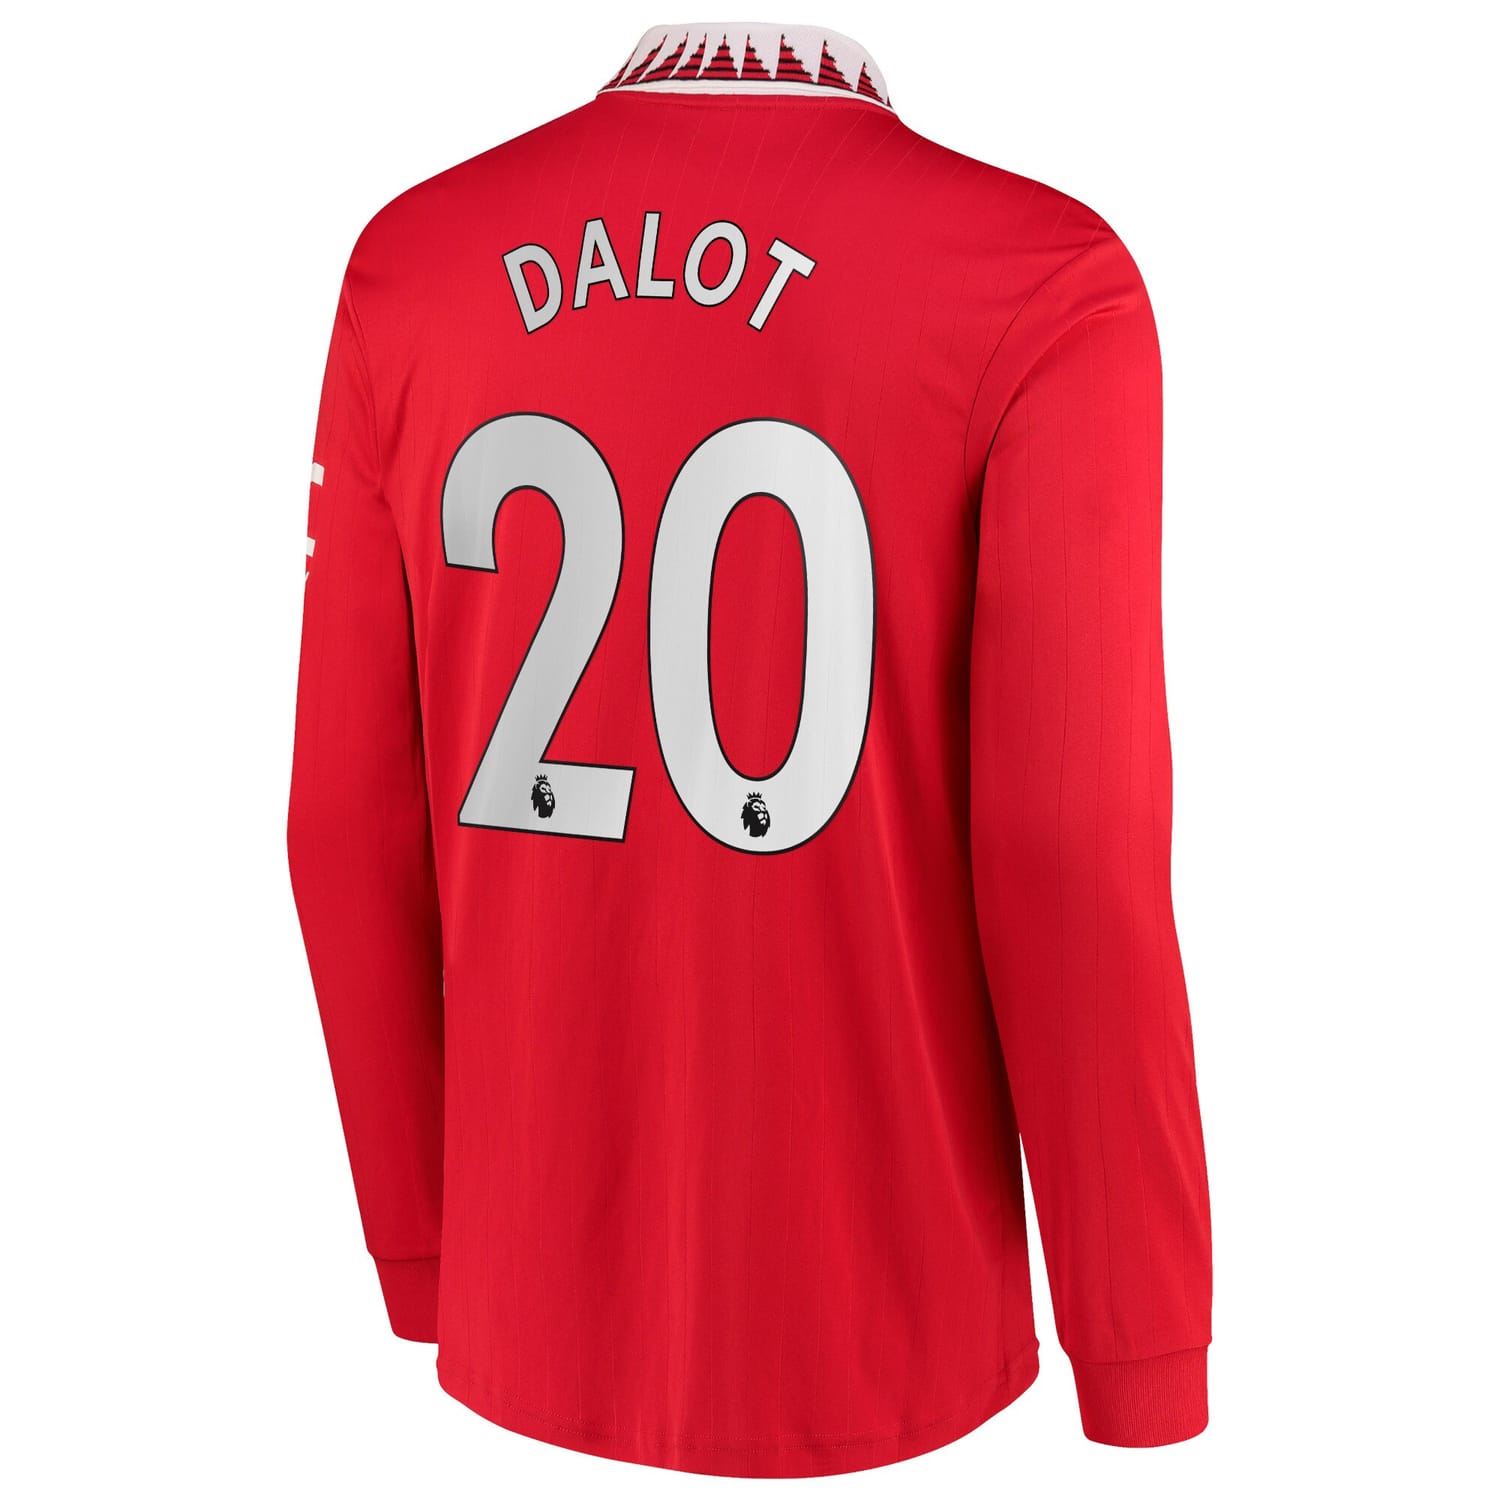 Premier League Manchester United Home Jersey Shirt Long Sleeve 2022-23 player Diogo Dalot 20 printing for Men